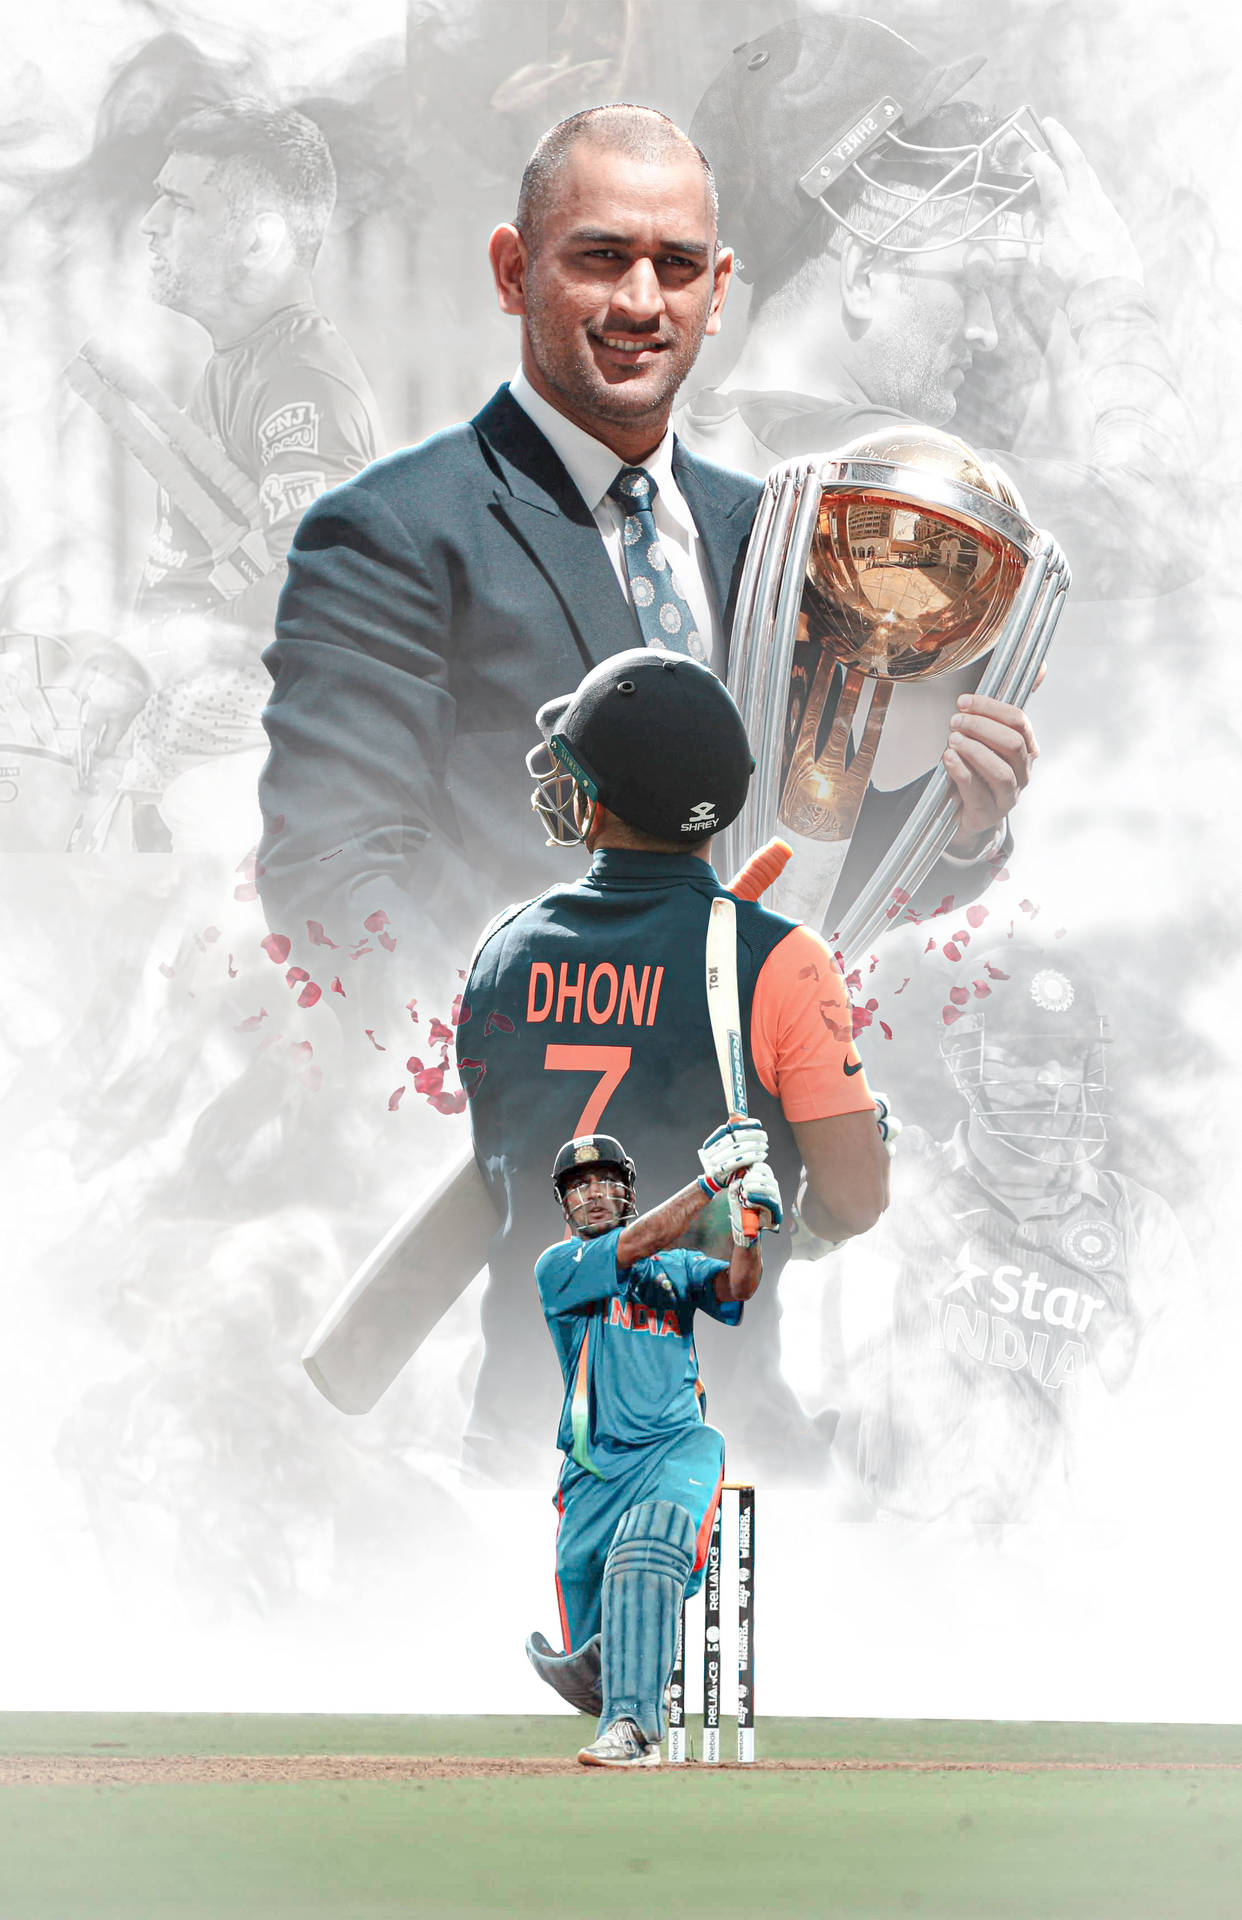 Ms Dhoni PC Wallpapers - Wallpaper Cave